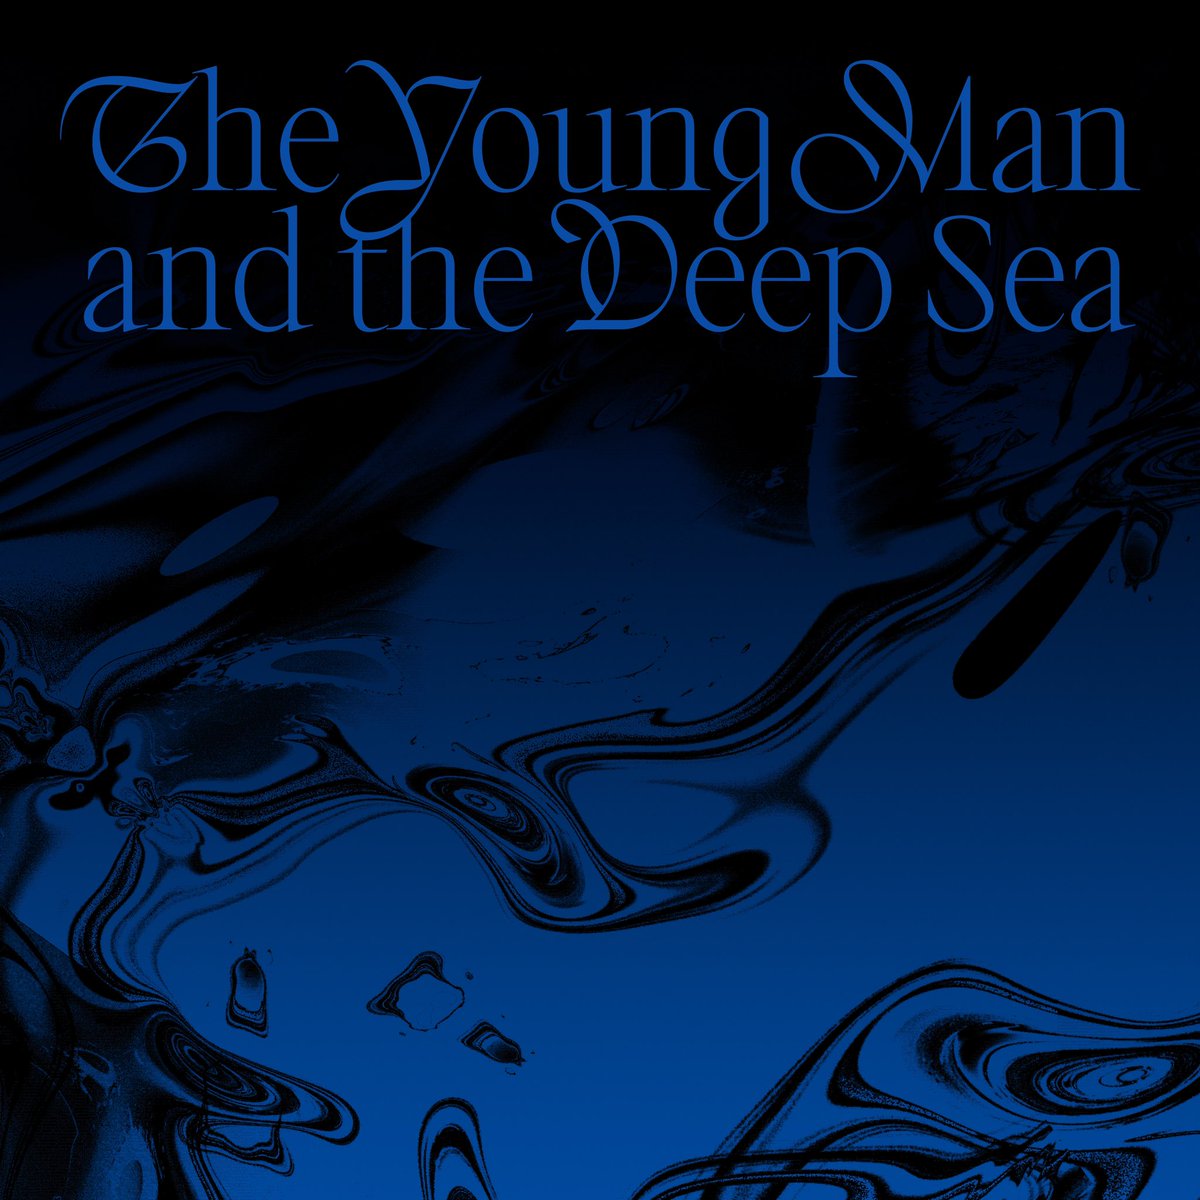 LIMHYUNSIK 2nd Mini Album [The Young Man and the Deep Sea] Online Cover💙 2024. 02. 16 18:00 (KST) #임현식 #LIMHYUNSIK #고독한바다 #LaMar #The_Young_Man_and_the_Deep_Sea